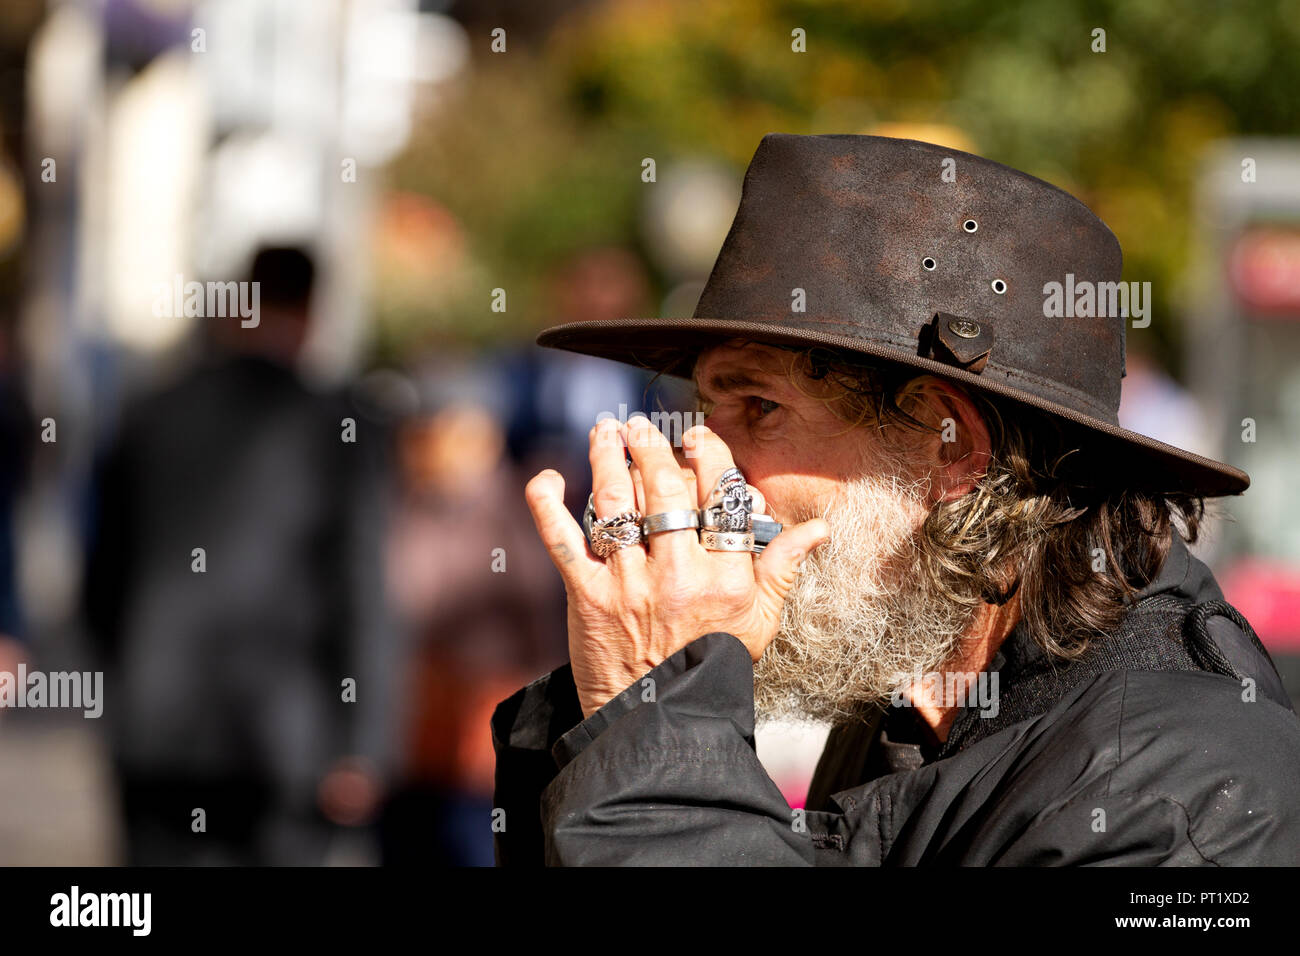 Dundee, Tayside, Scotland, UK. 5th October, 2018. Former X Factor 2017 audition contestant 'Fast Eddie' Lafferty is the harmonica playing busker and well known face on the streets of Dundee, Scotland. Eddie Lafferty has been playing the harmonica since he was 7 years old, nearly 50 years. This is Fast Eddie performing today and the streets are his stage. Credit: Dundee Photographics / Alamy Live News Stock Photo